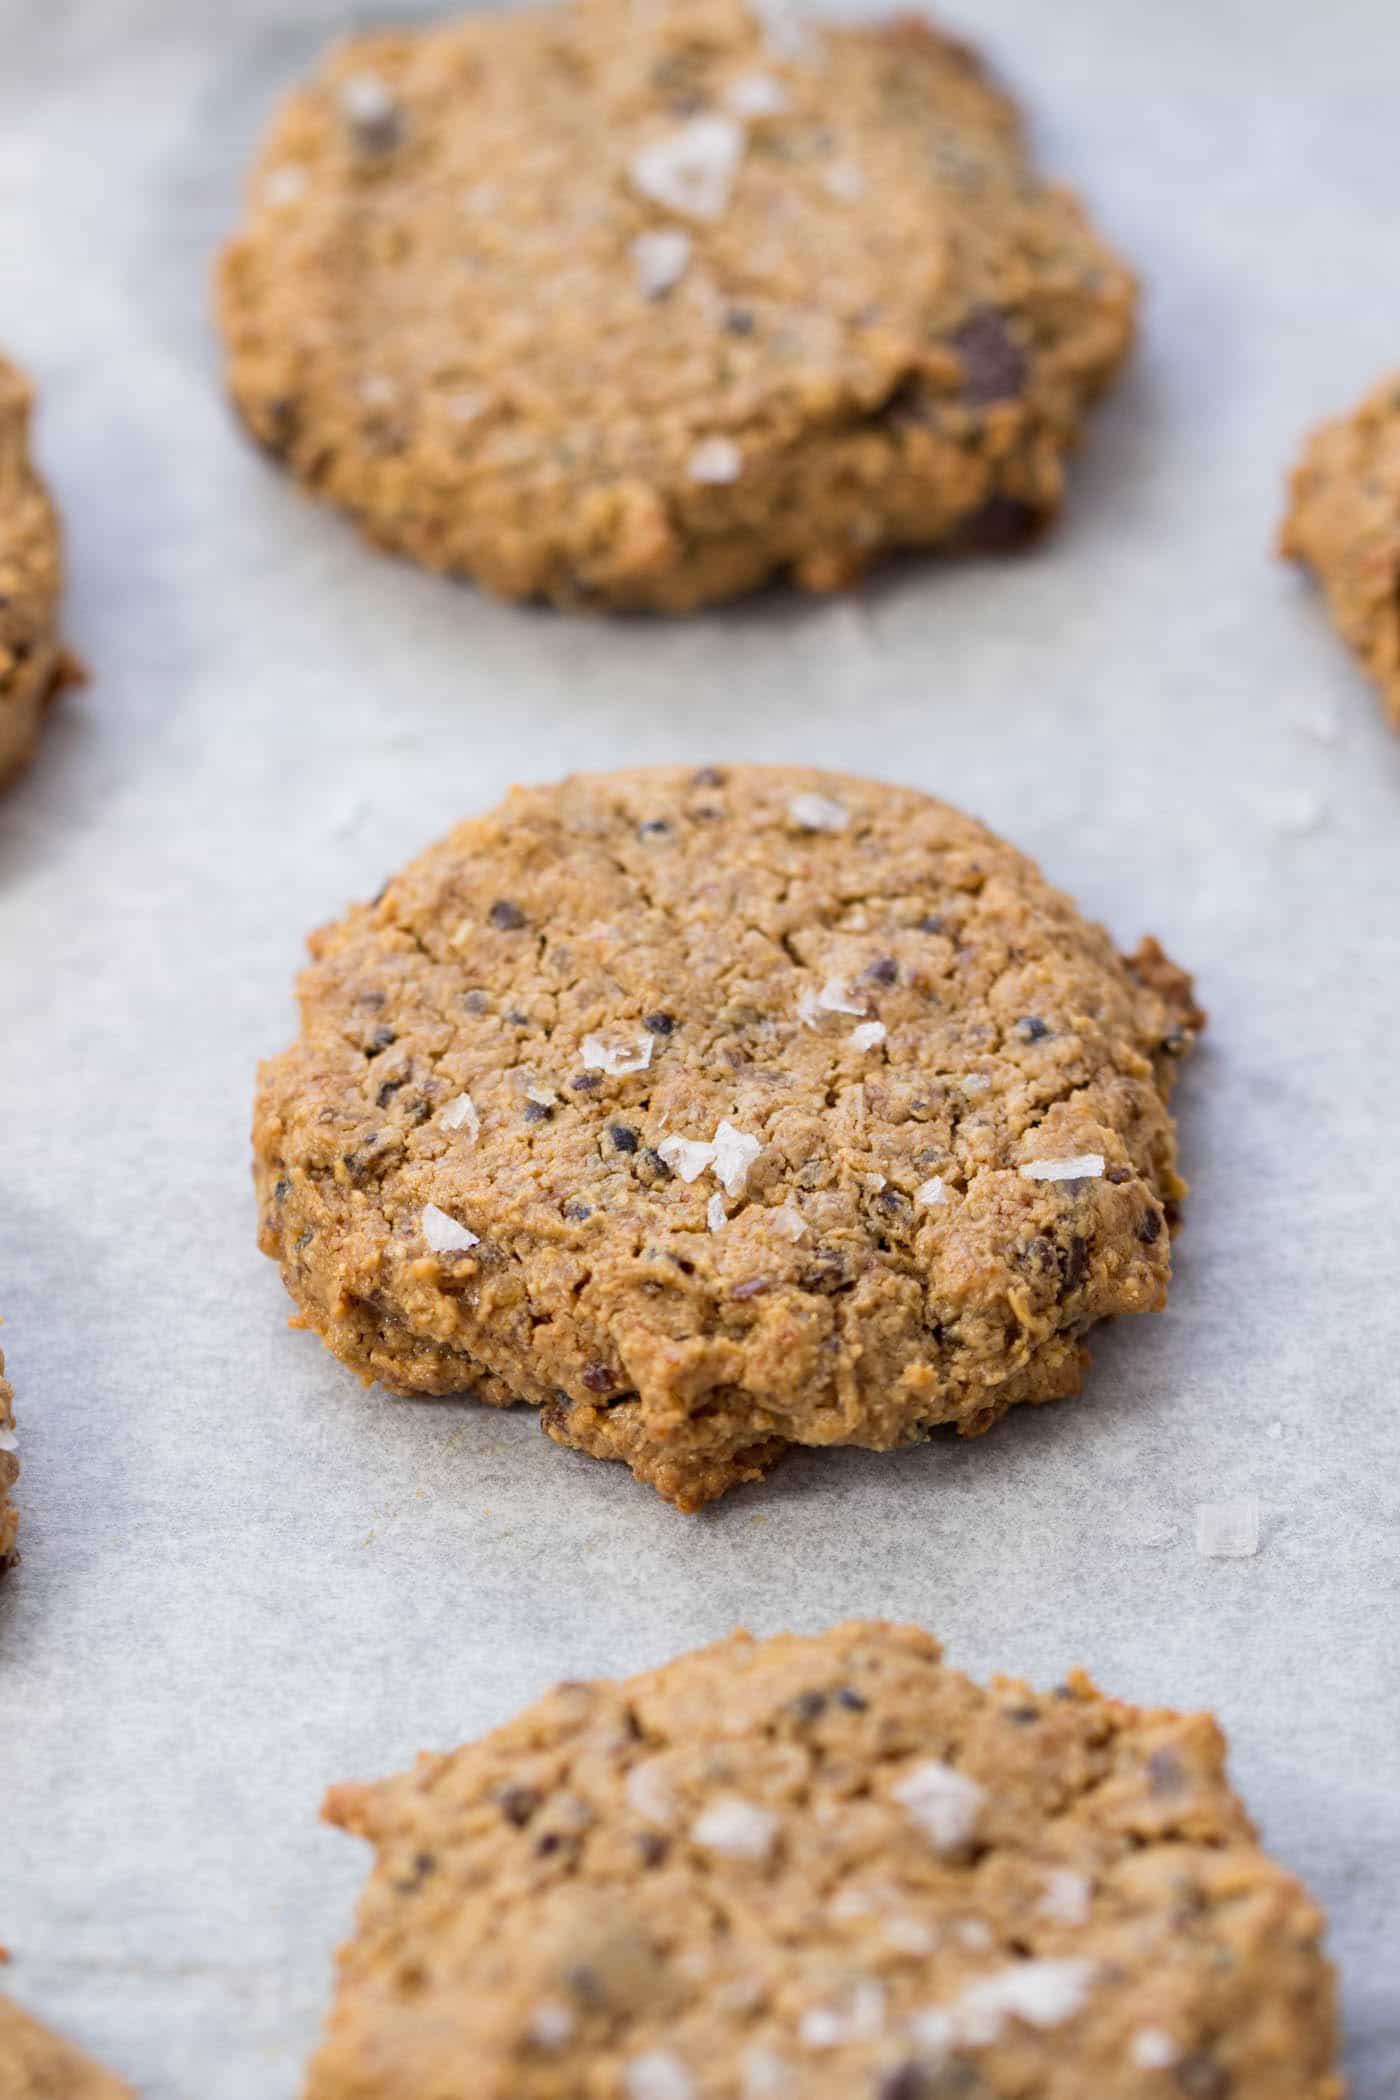 CASHEW QUINOA COOKIES -- healthy chocolate chip cookies made with a base of cashew butter + quinoa!